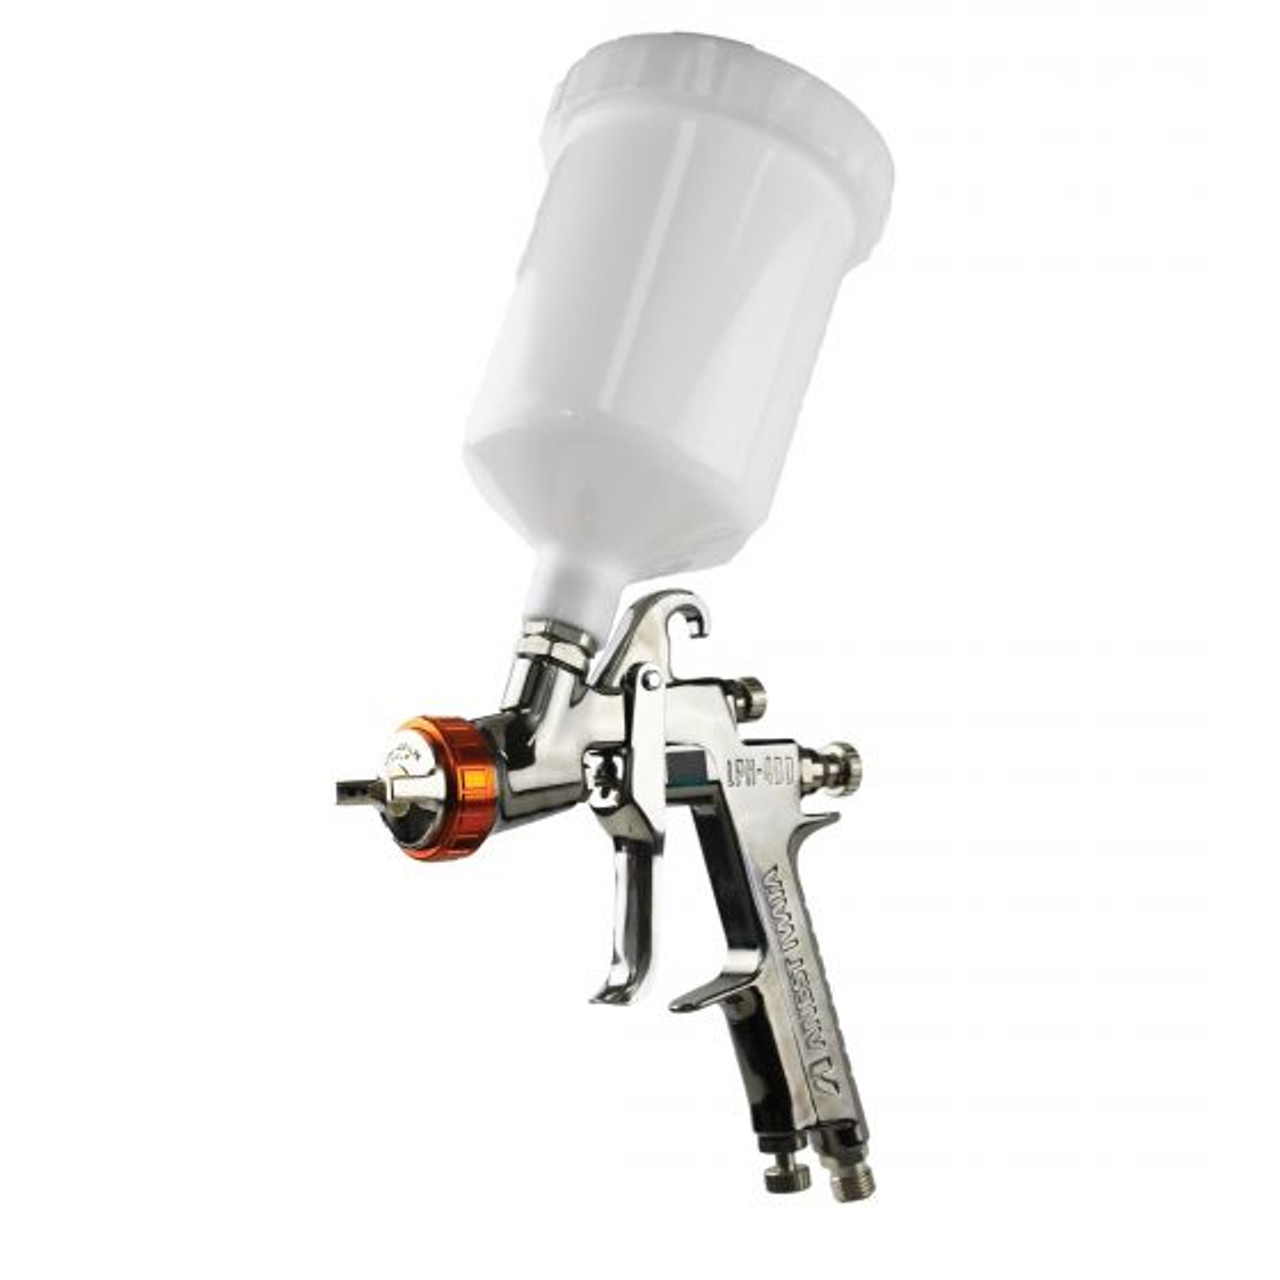 ANEST IWATA 5671 LPH400-LVX Extreme Series HVLP Gravity Feed Spray Gun with Cup, 1.4 mm Nozzle